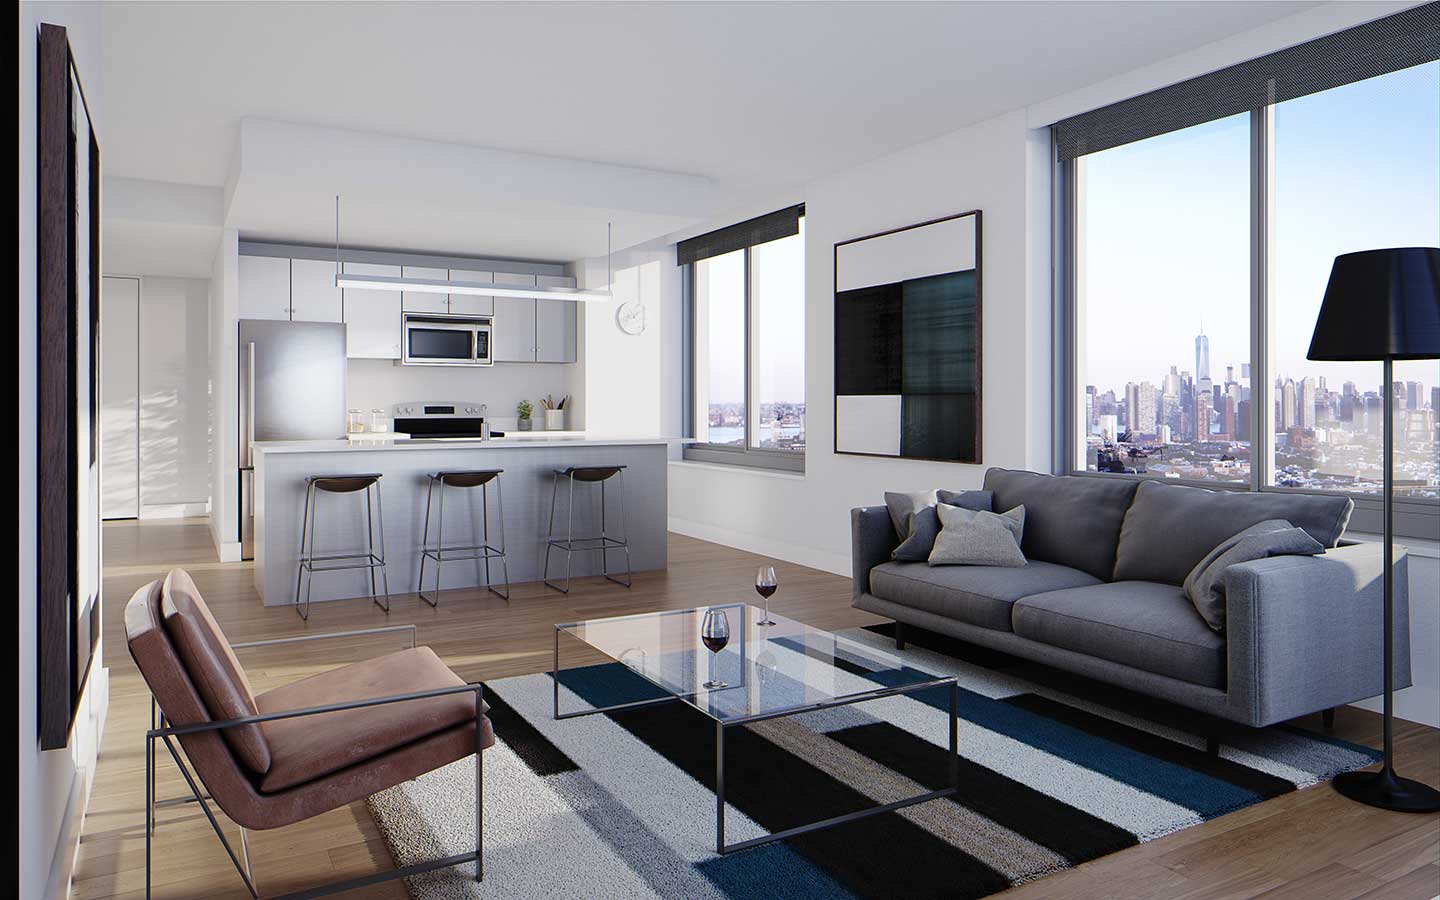 journal squared jersey city leasing